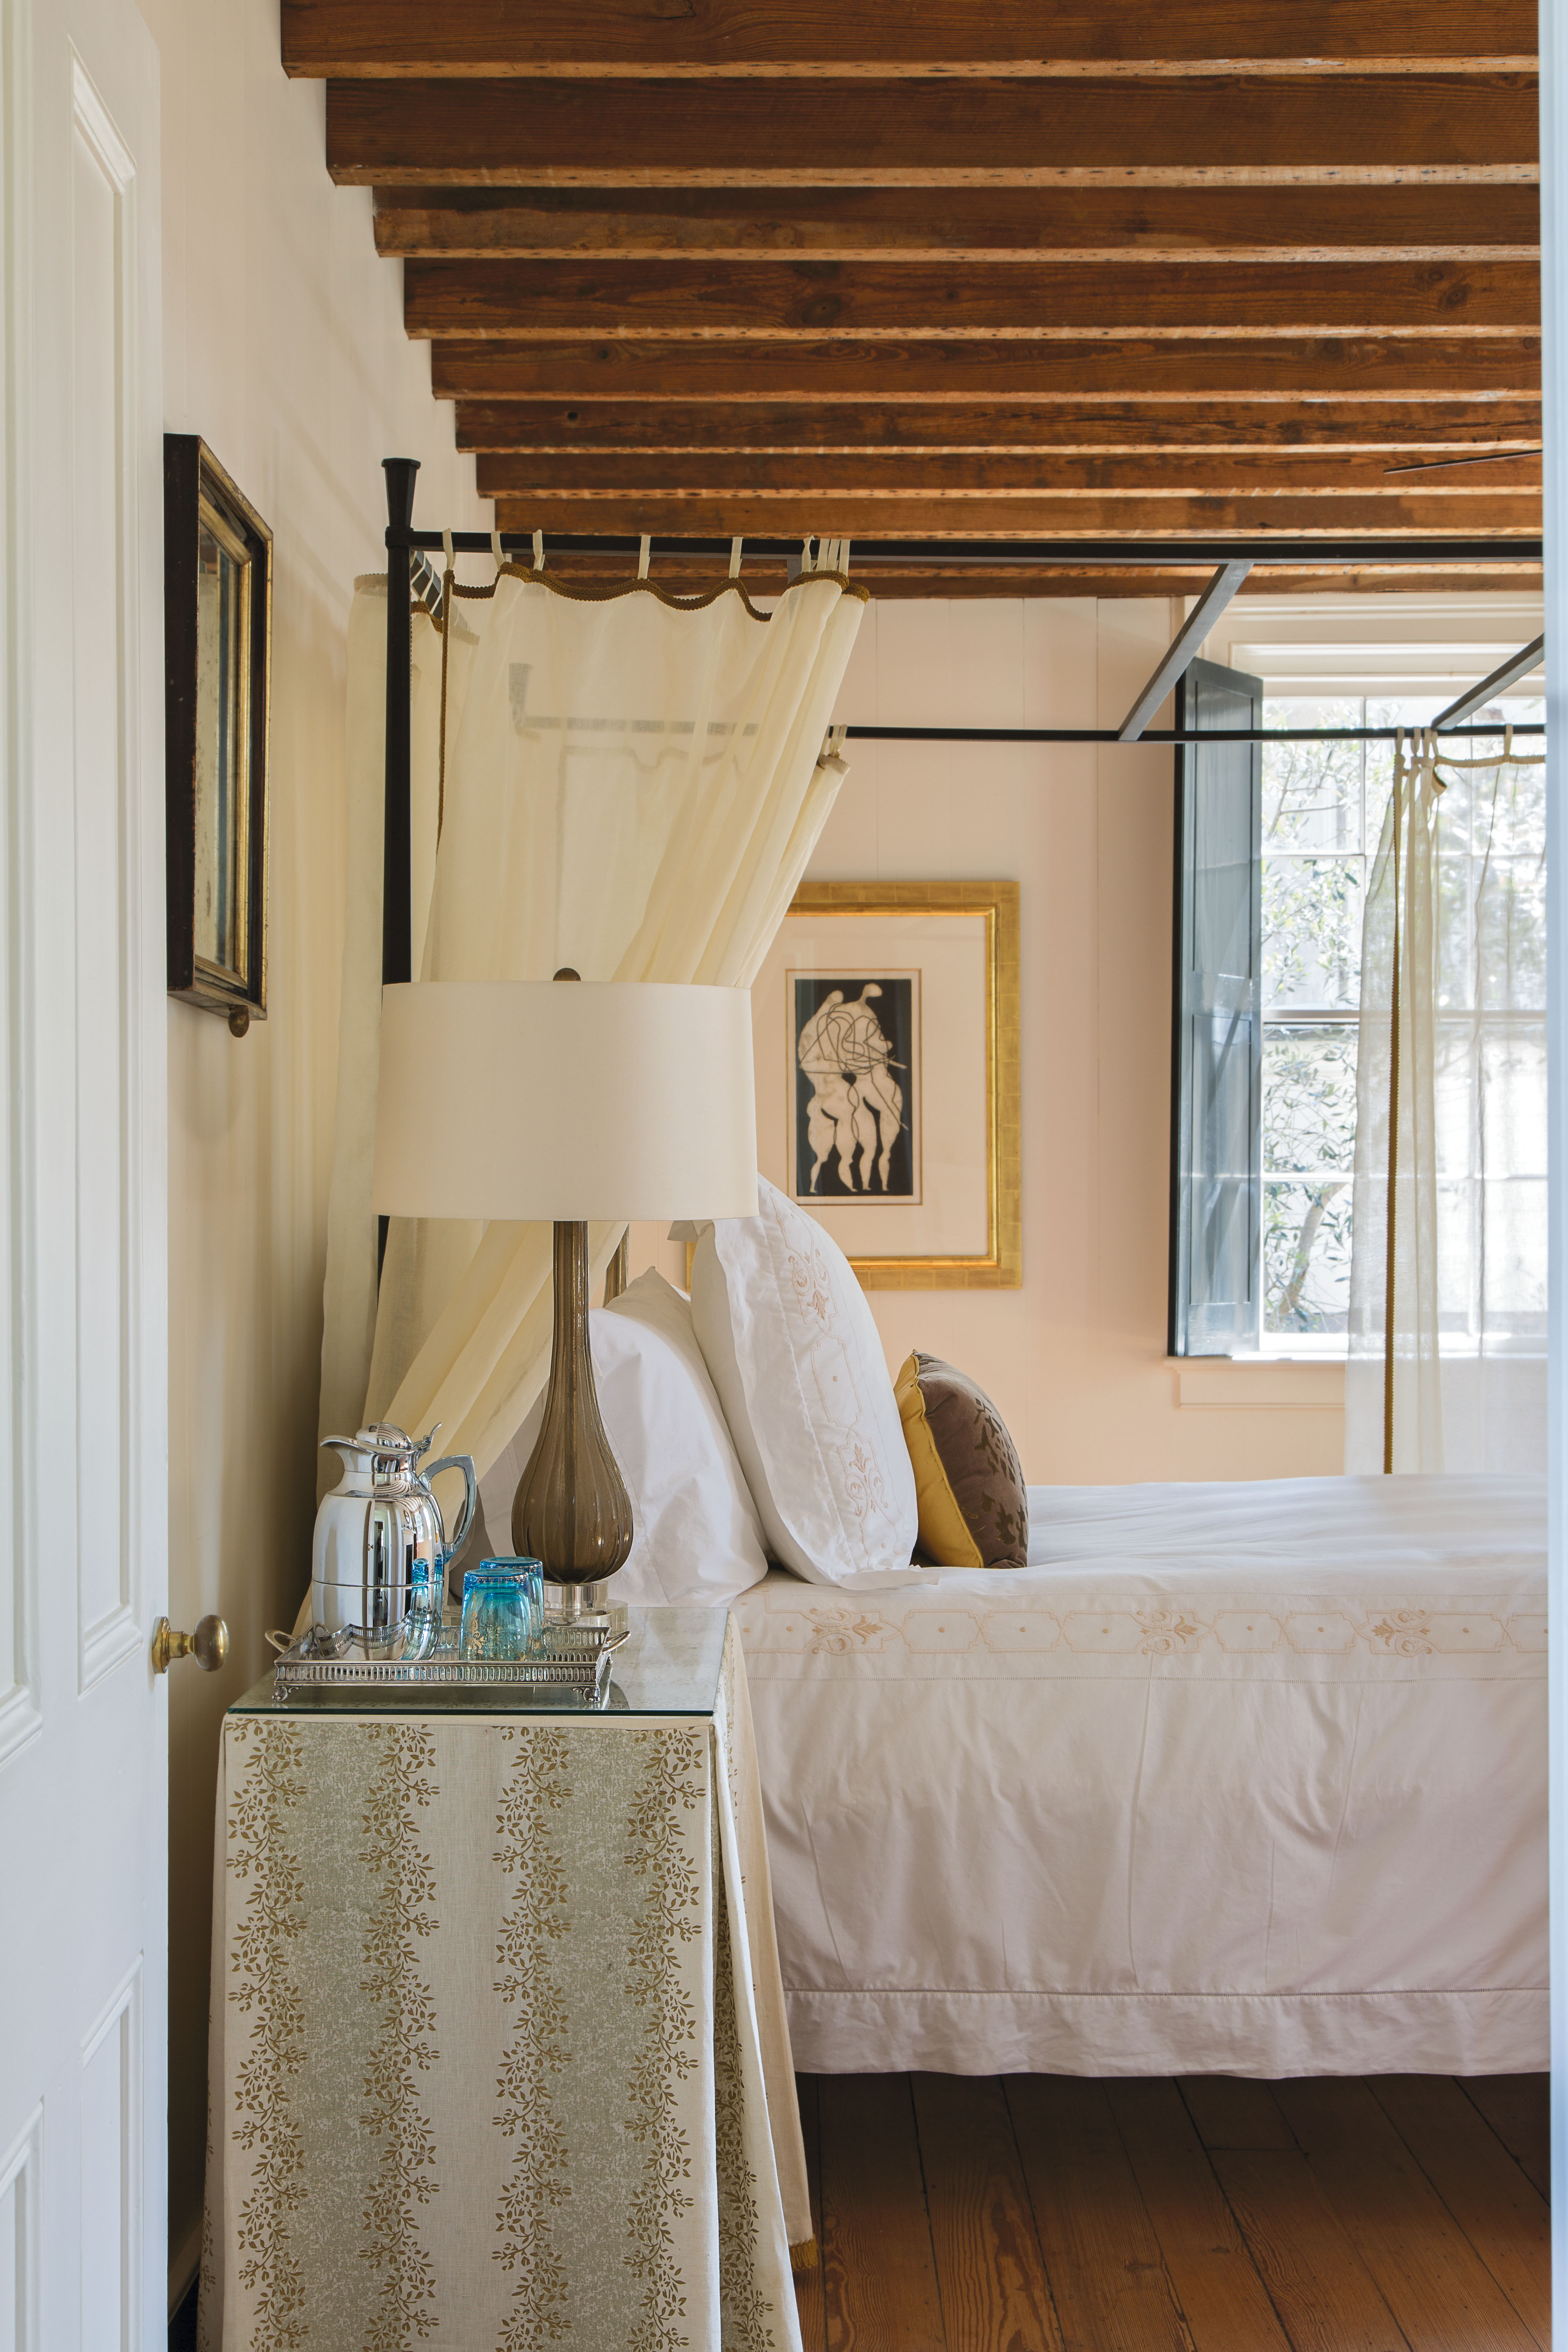 The guest quarters, located within what was once a detached kitchen house, feature original exposed wood beams and wood flooring, as well as more breathtaking artworks, such as Otto Neumann monotypes.